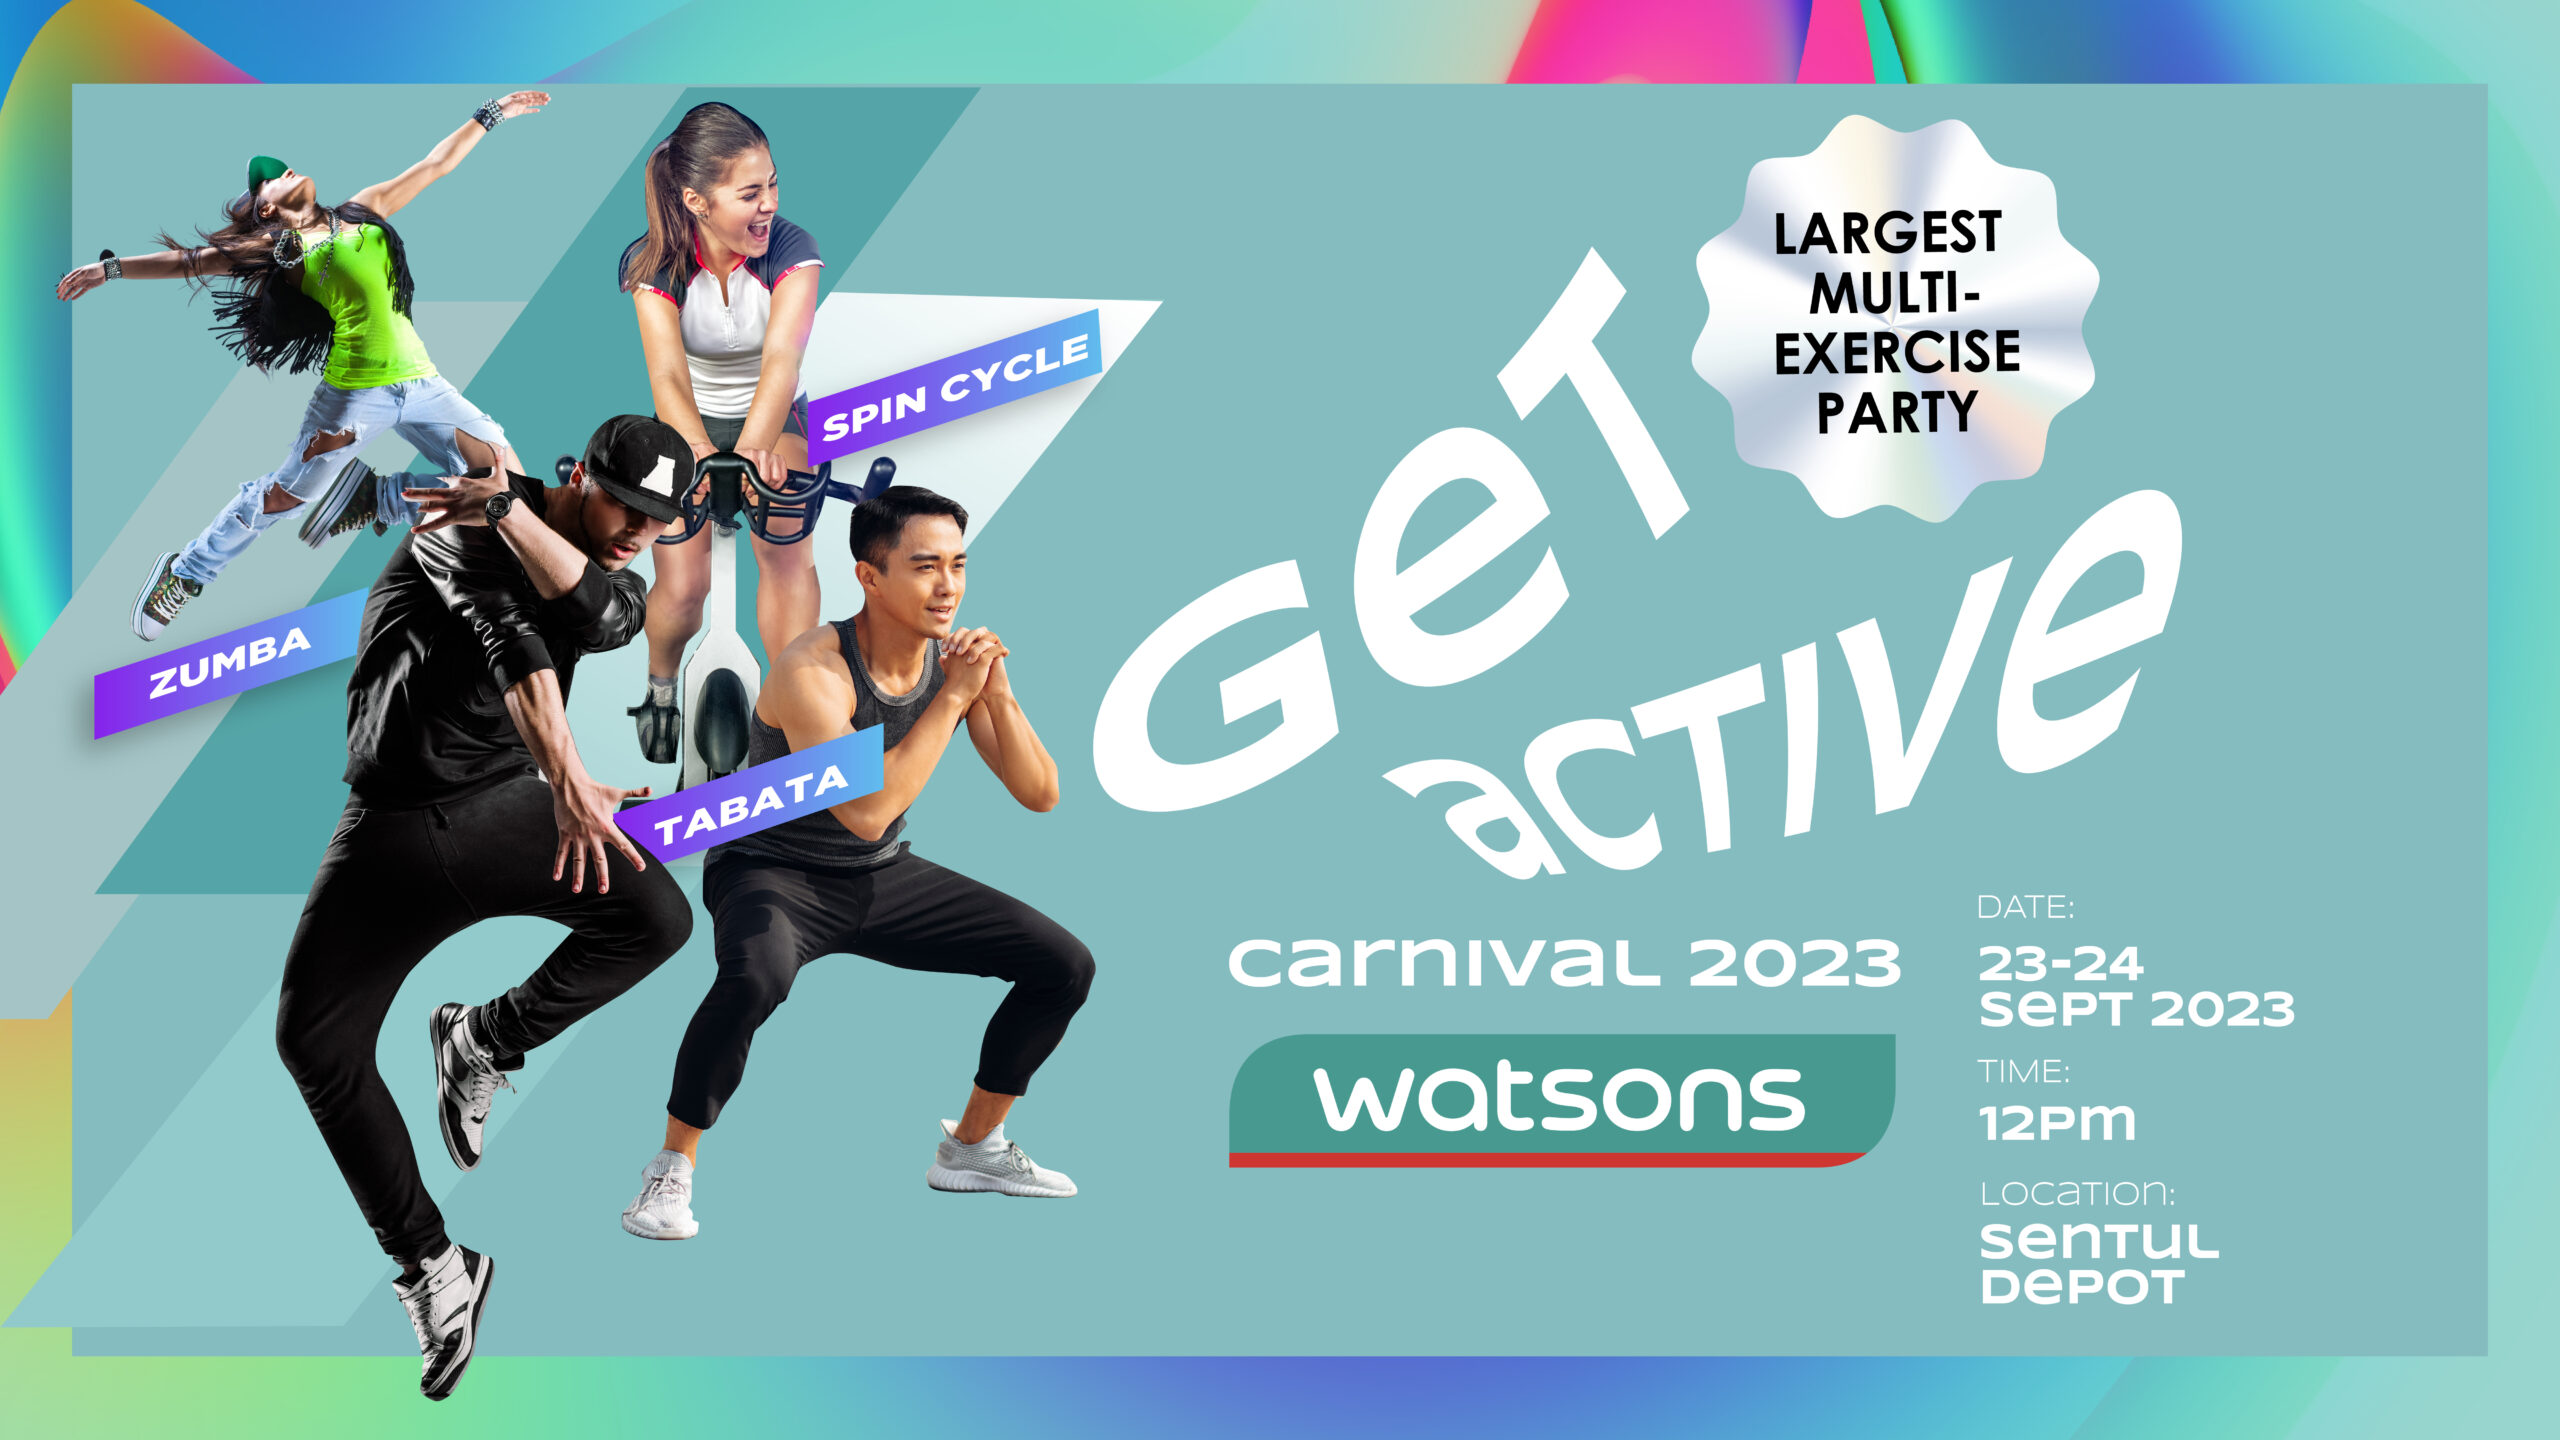 The largest get active carnival is back, join the fitness party of the year with watsons!